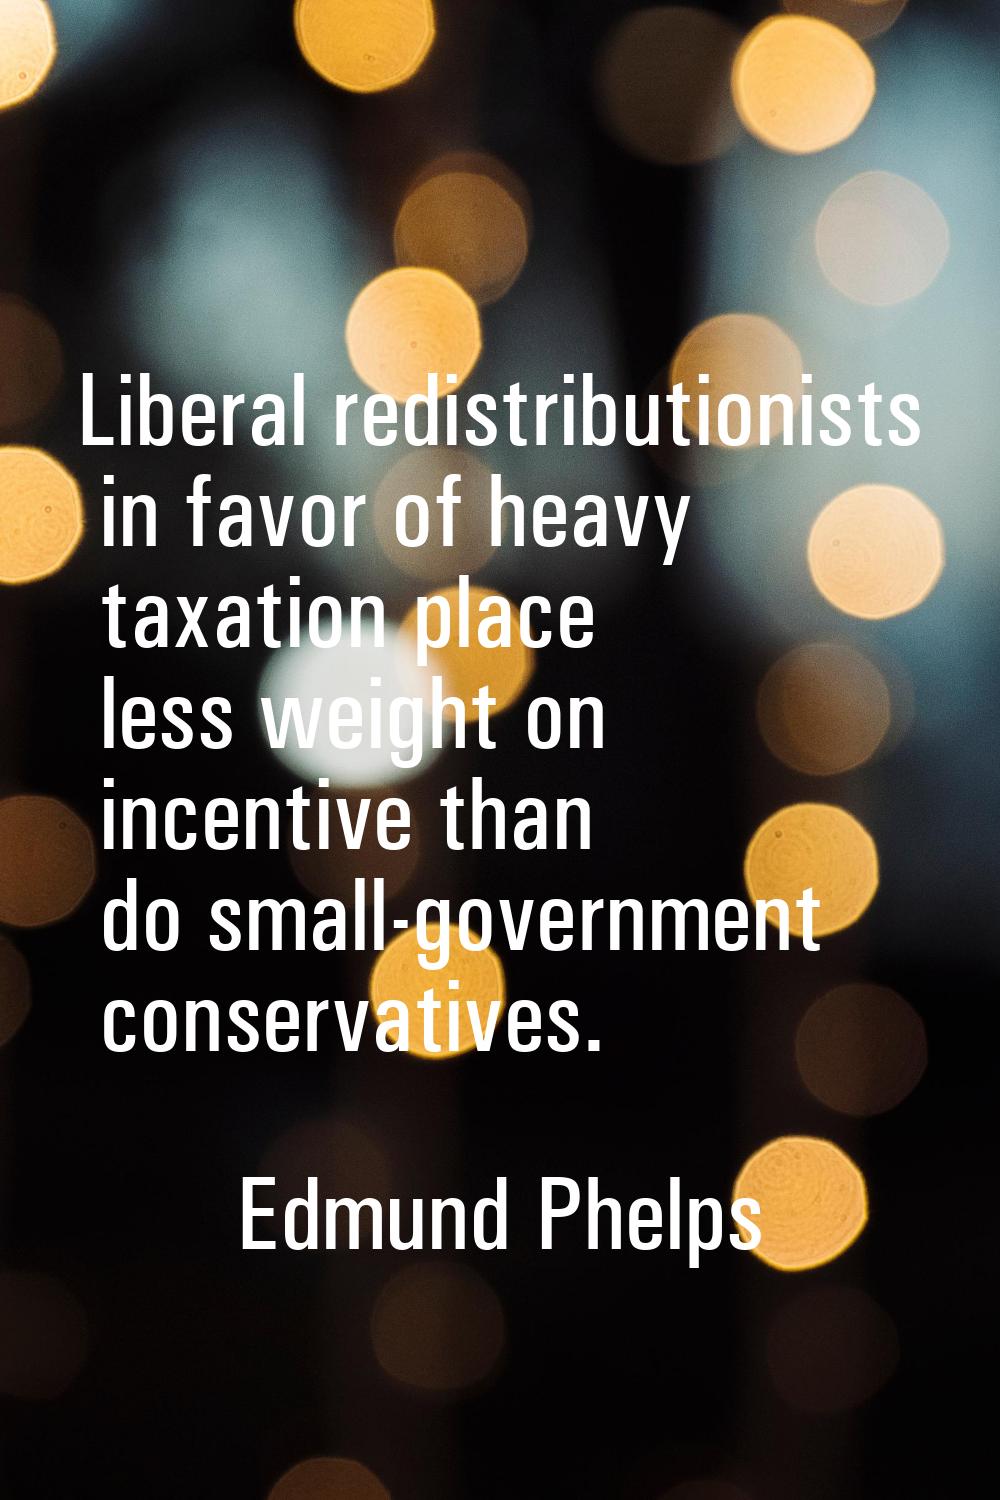 Liberal redistributionists in favor of heavy taxation place less weight on incentive than do small-